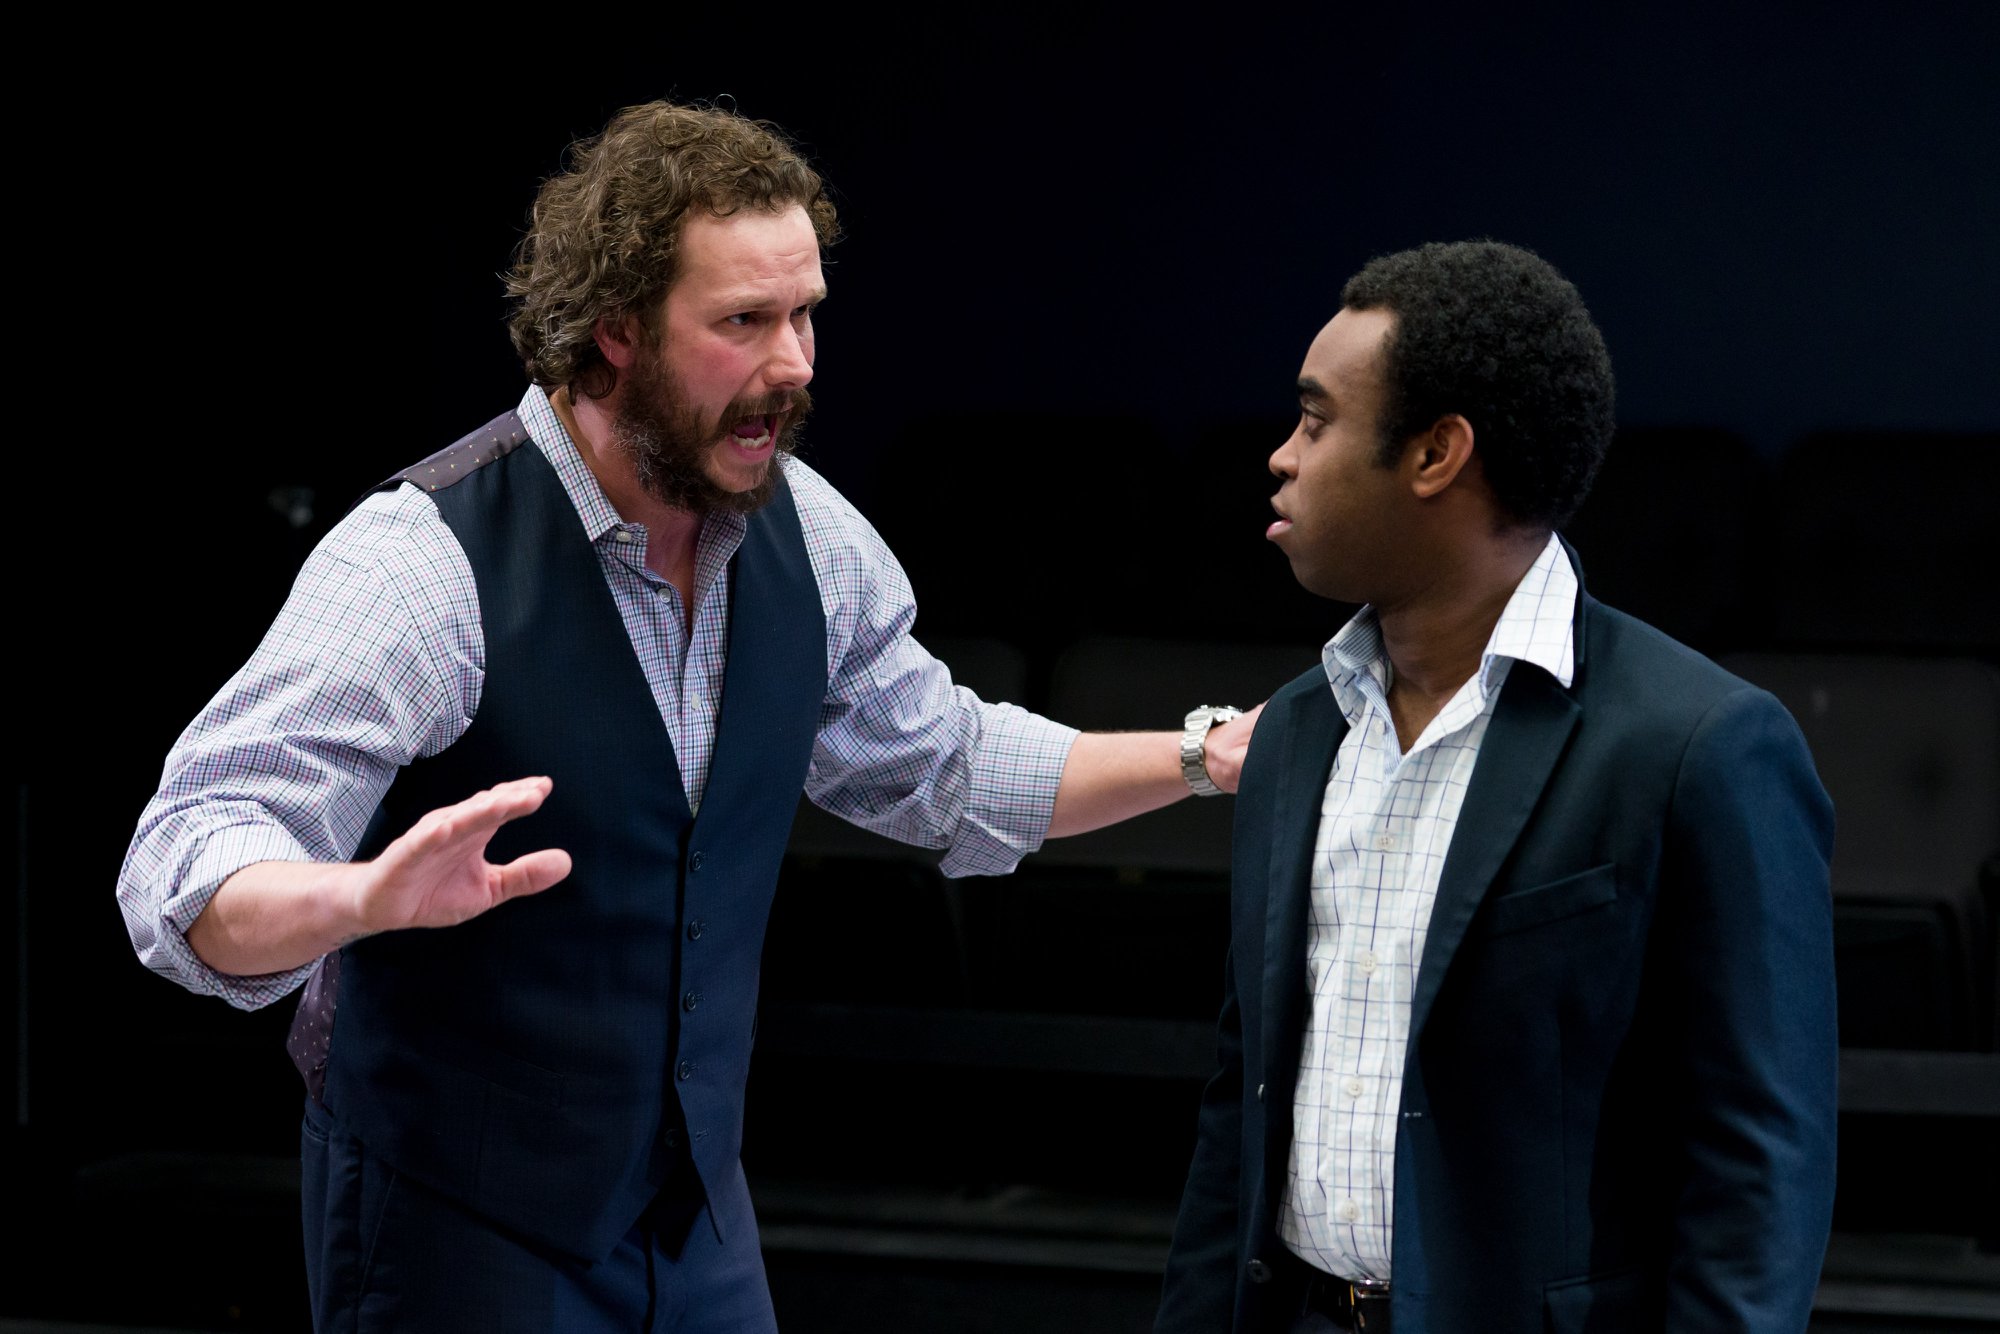  Anthony Goes and Marc Pierre in Walt McGough’s  Brawler  at the Kitchen Theatre Company, directed by M. Bevin O’Gara. Photo: Dave Burbank 